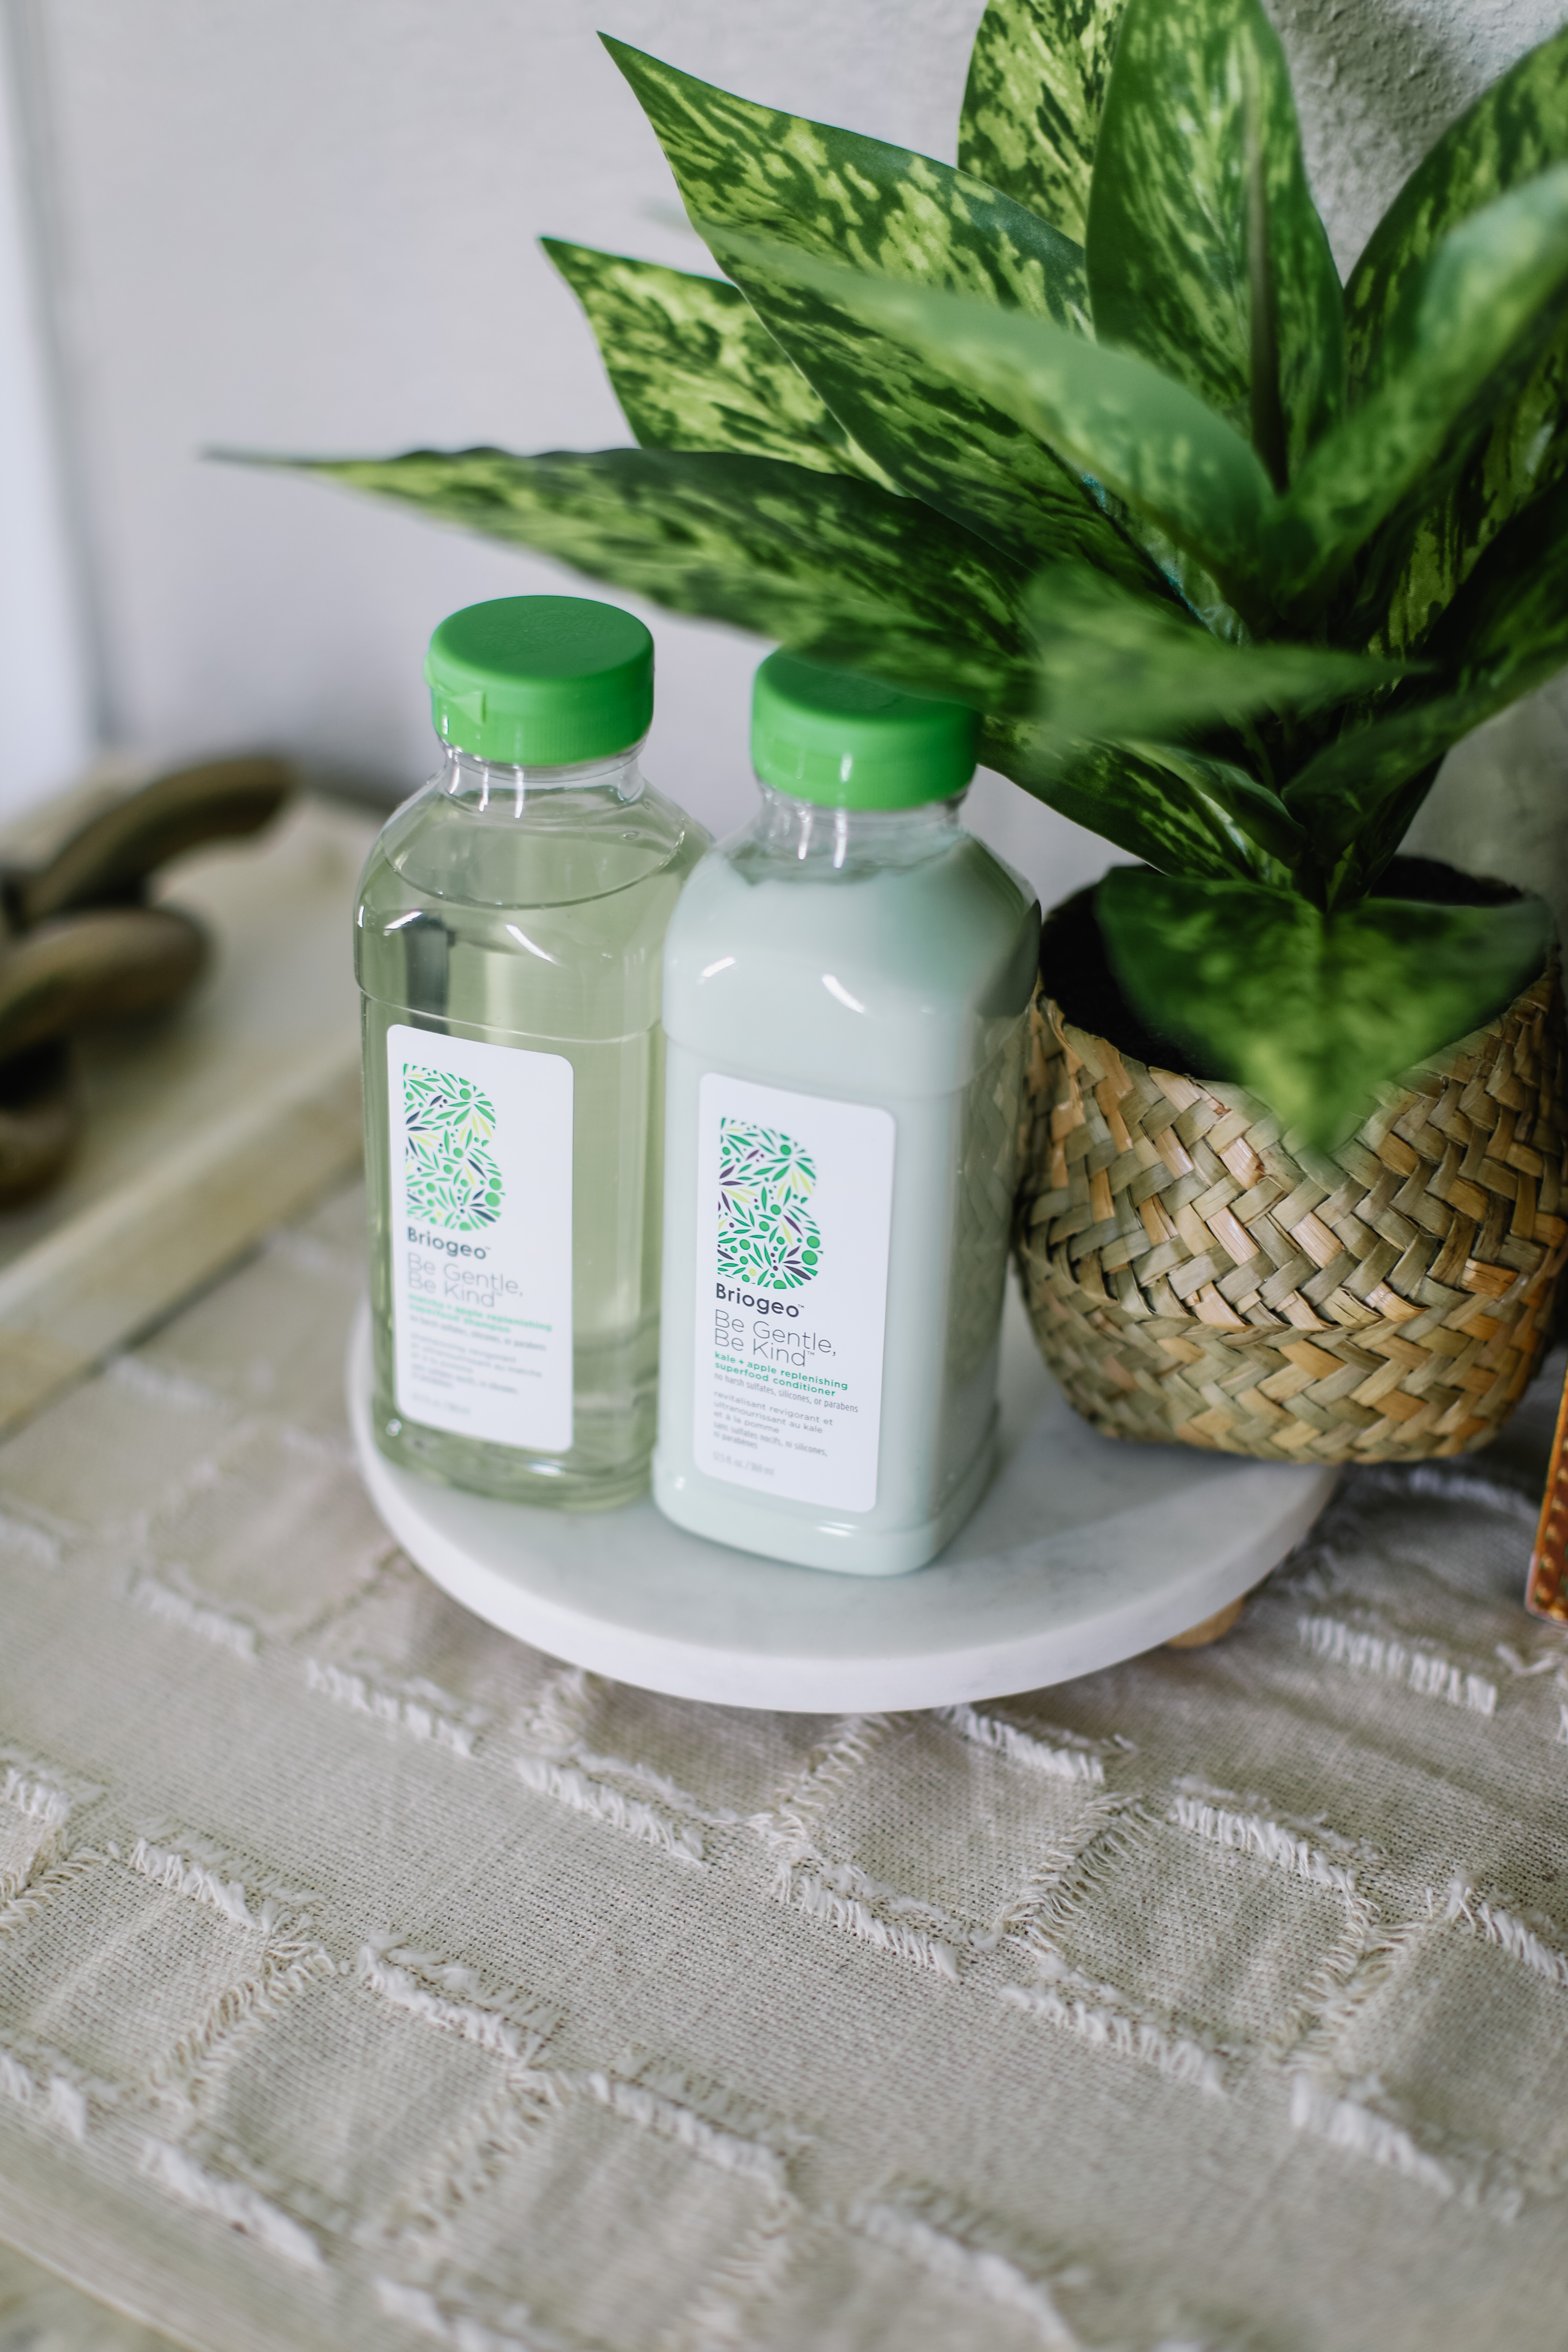 Briogeo Shampoo and Conditioner Reviews | Be Gentle, Be Kind Matcha + Apple Replenishing Shampoo | Affordable by Amanda